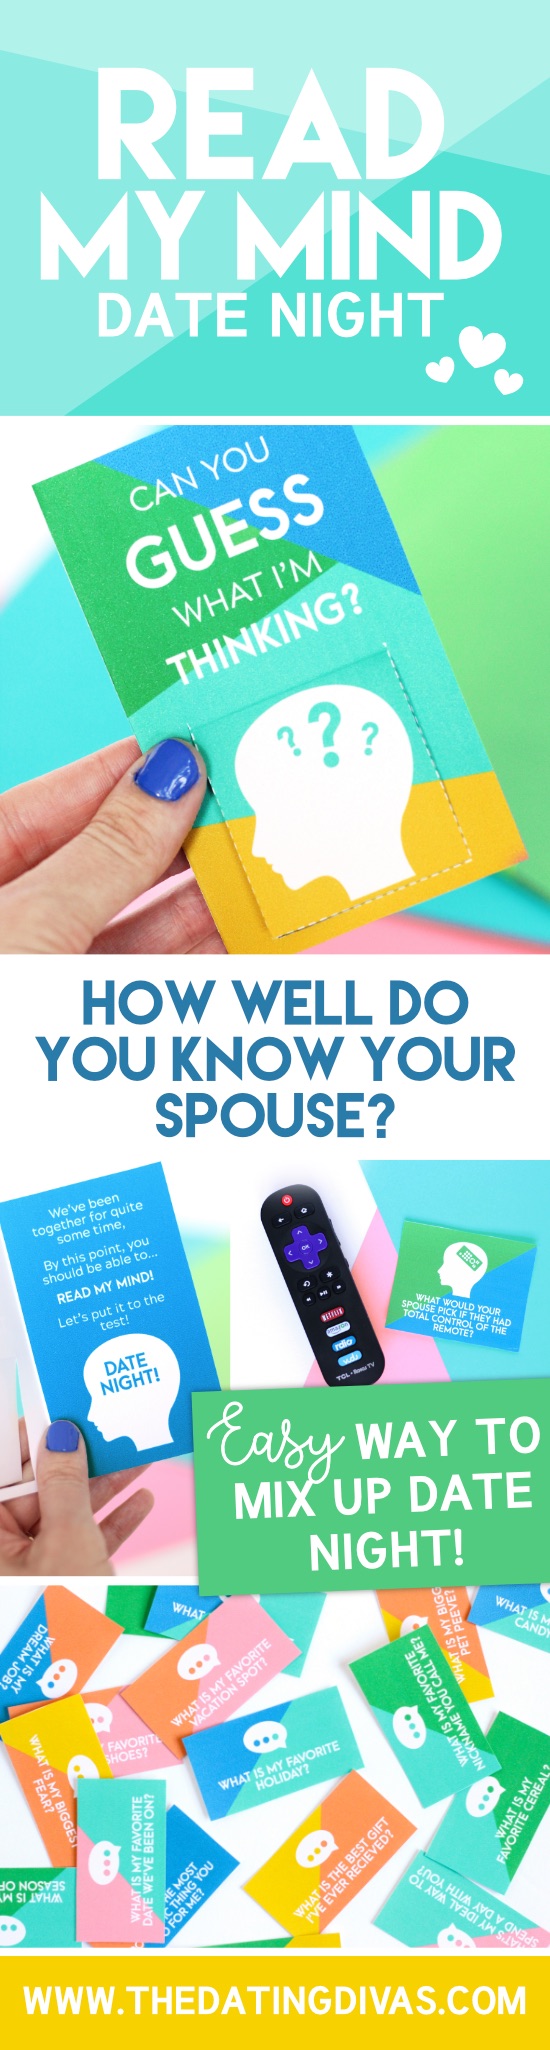 Mix up your date night routine! This was such an easy date idea to do with any of your favorite date activities. Funny and insightful! #easydateidea #gettoknowyourspouse #howwelldoyouknowyourspouse